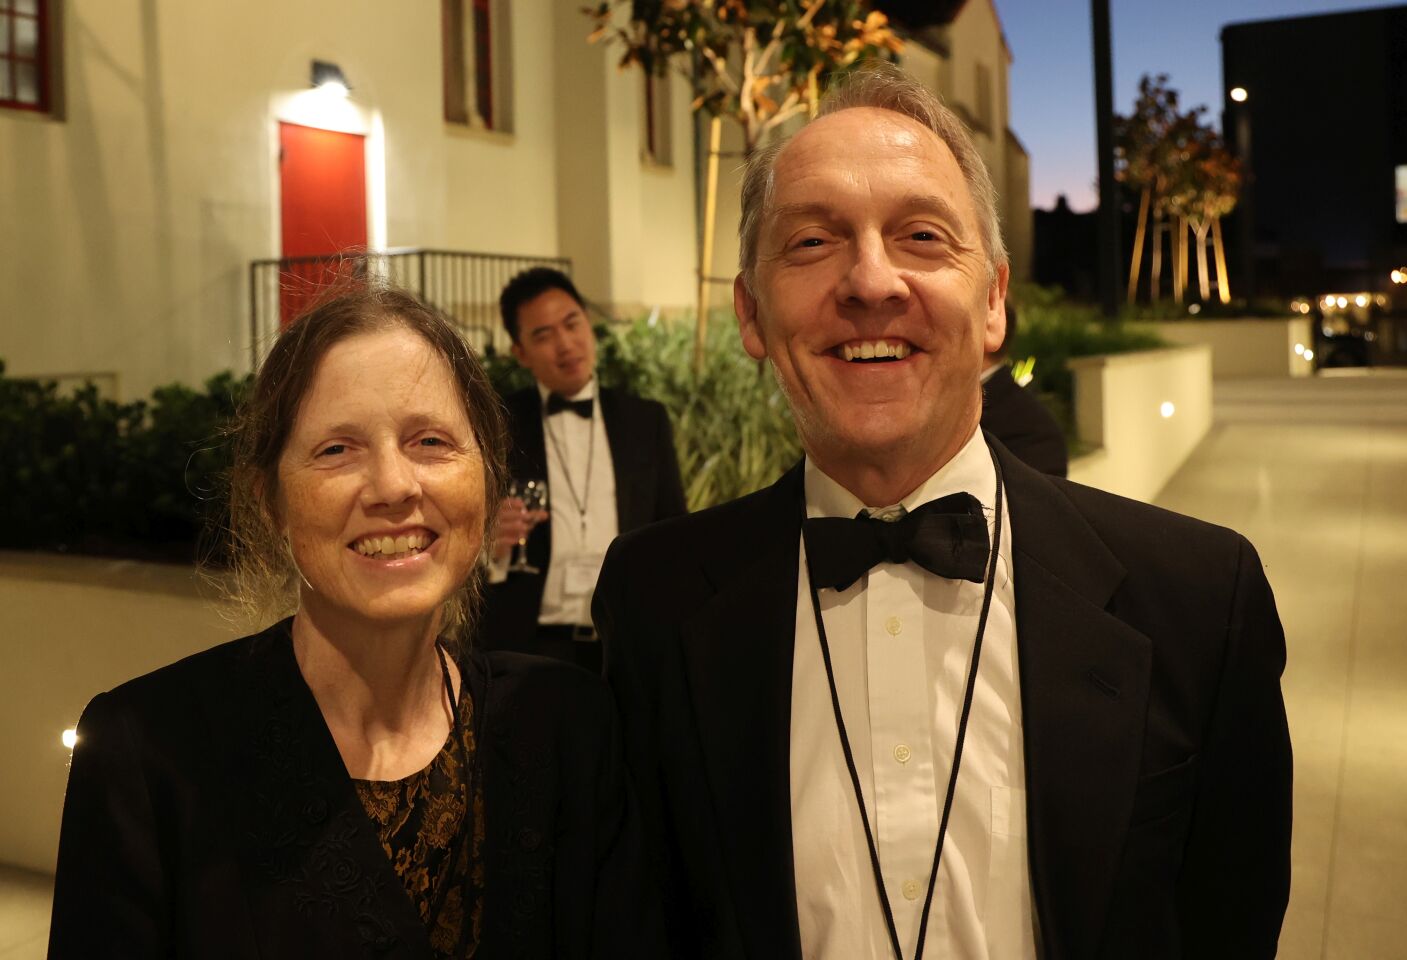 Drs. Sarah Gille and Stefan Llewellyn-Smith.JPG